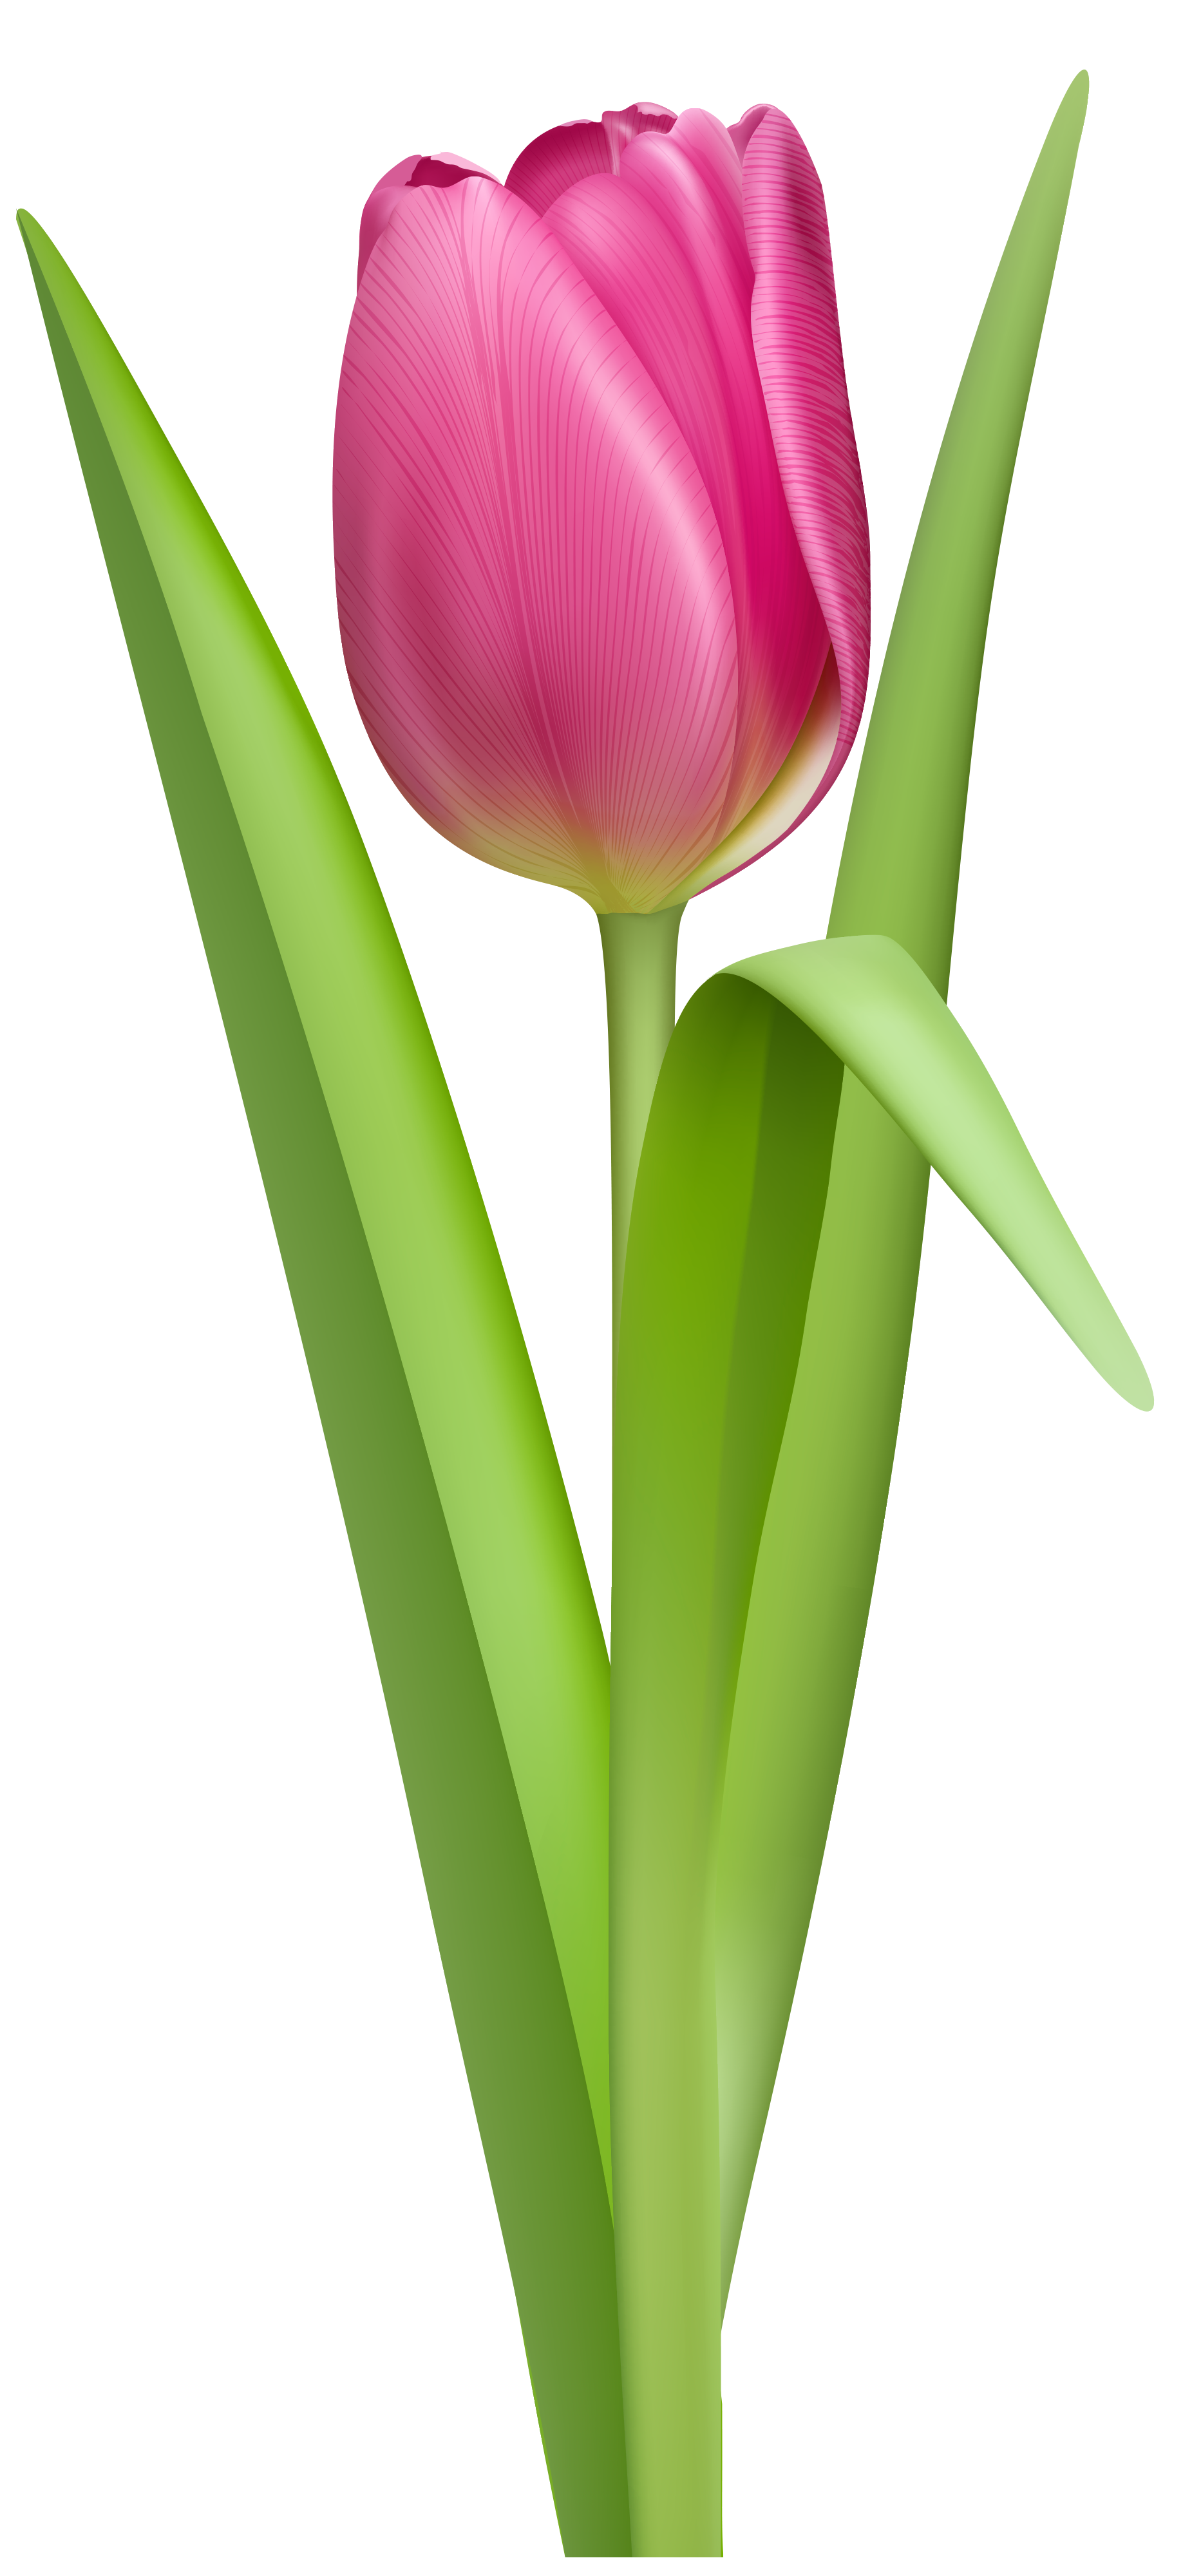 Tulips clipart. Tulip no background flower